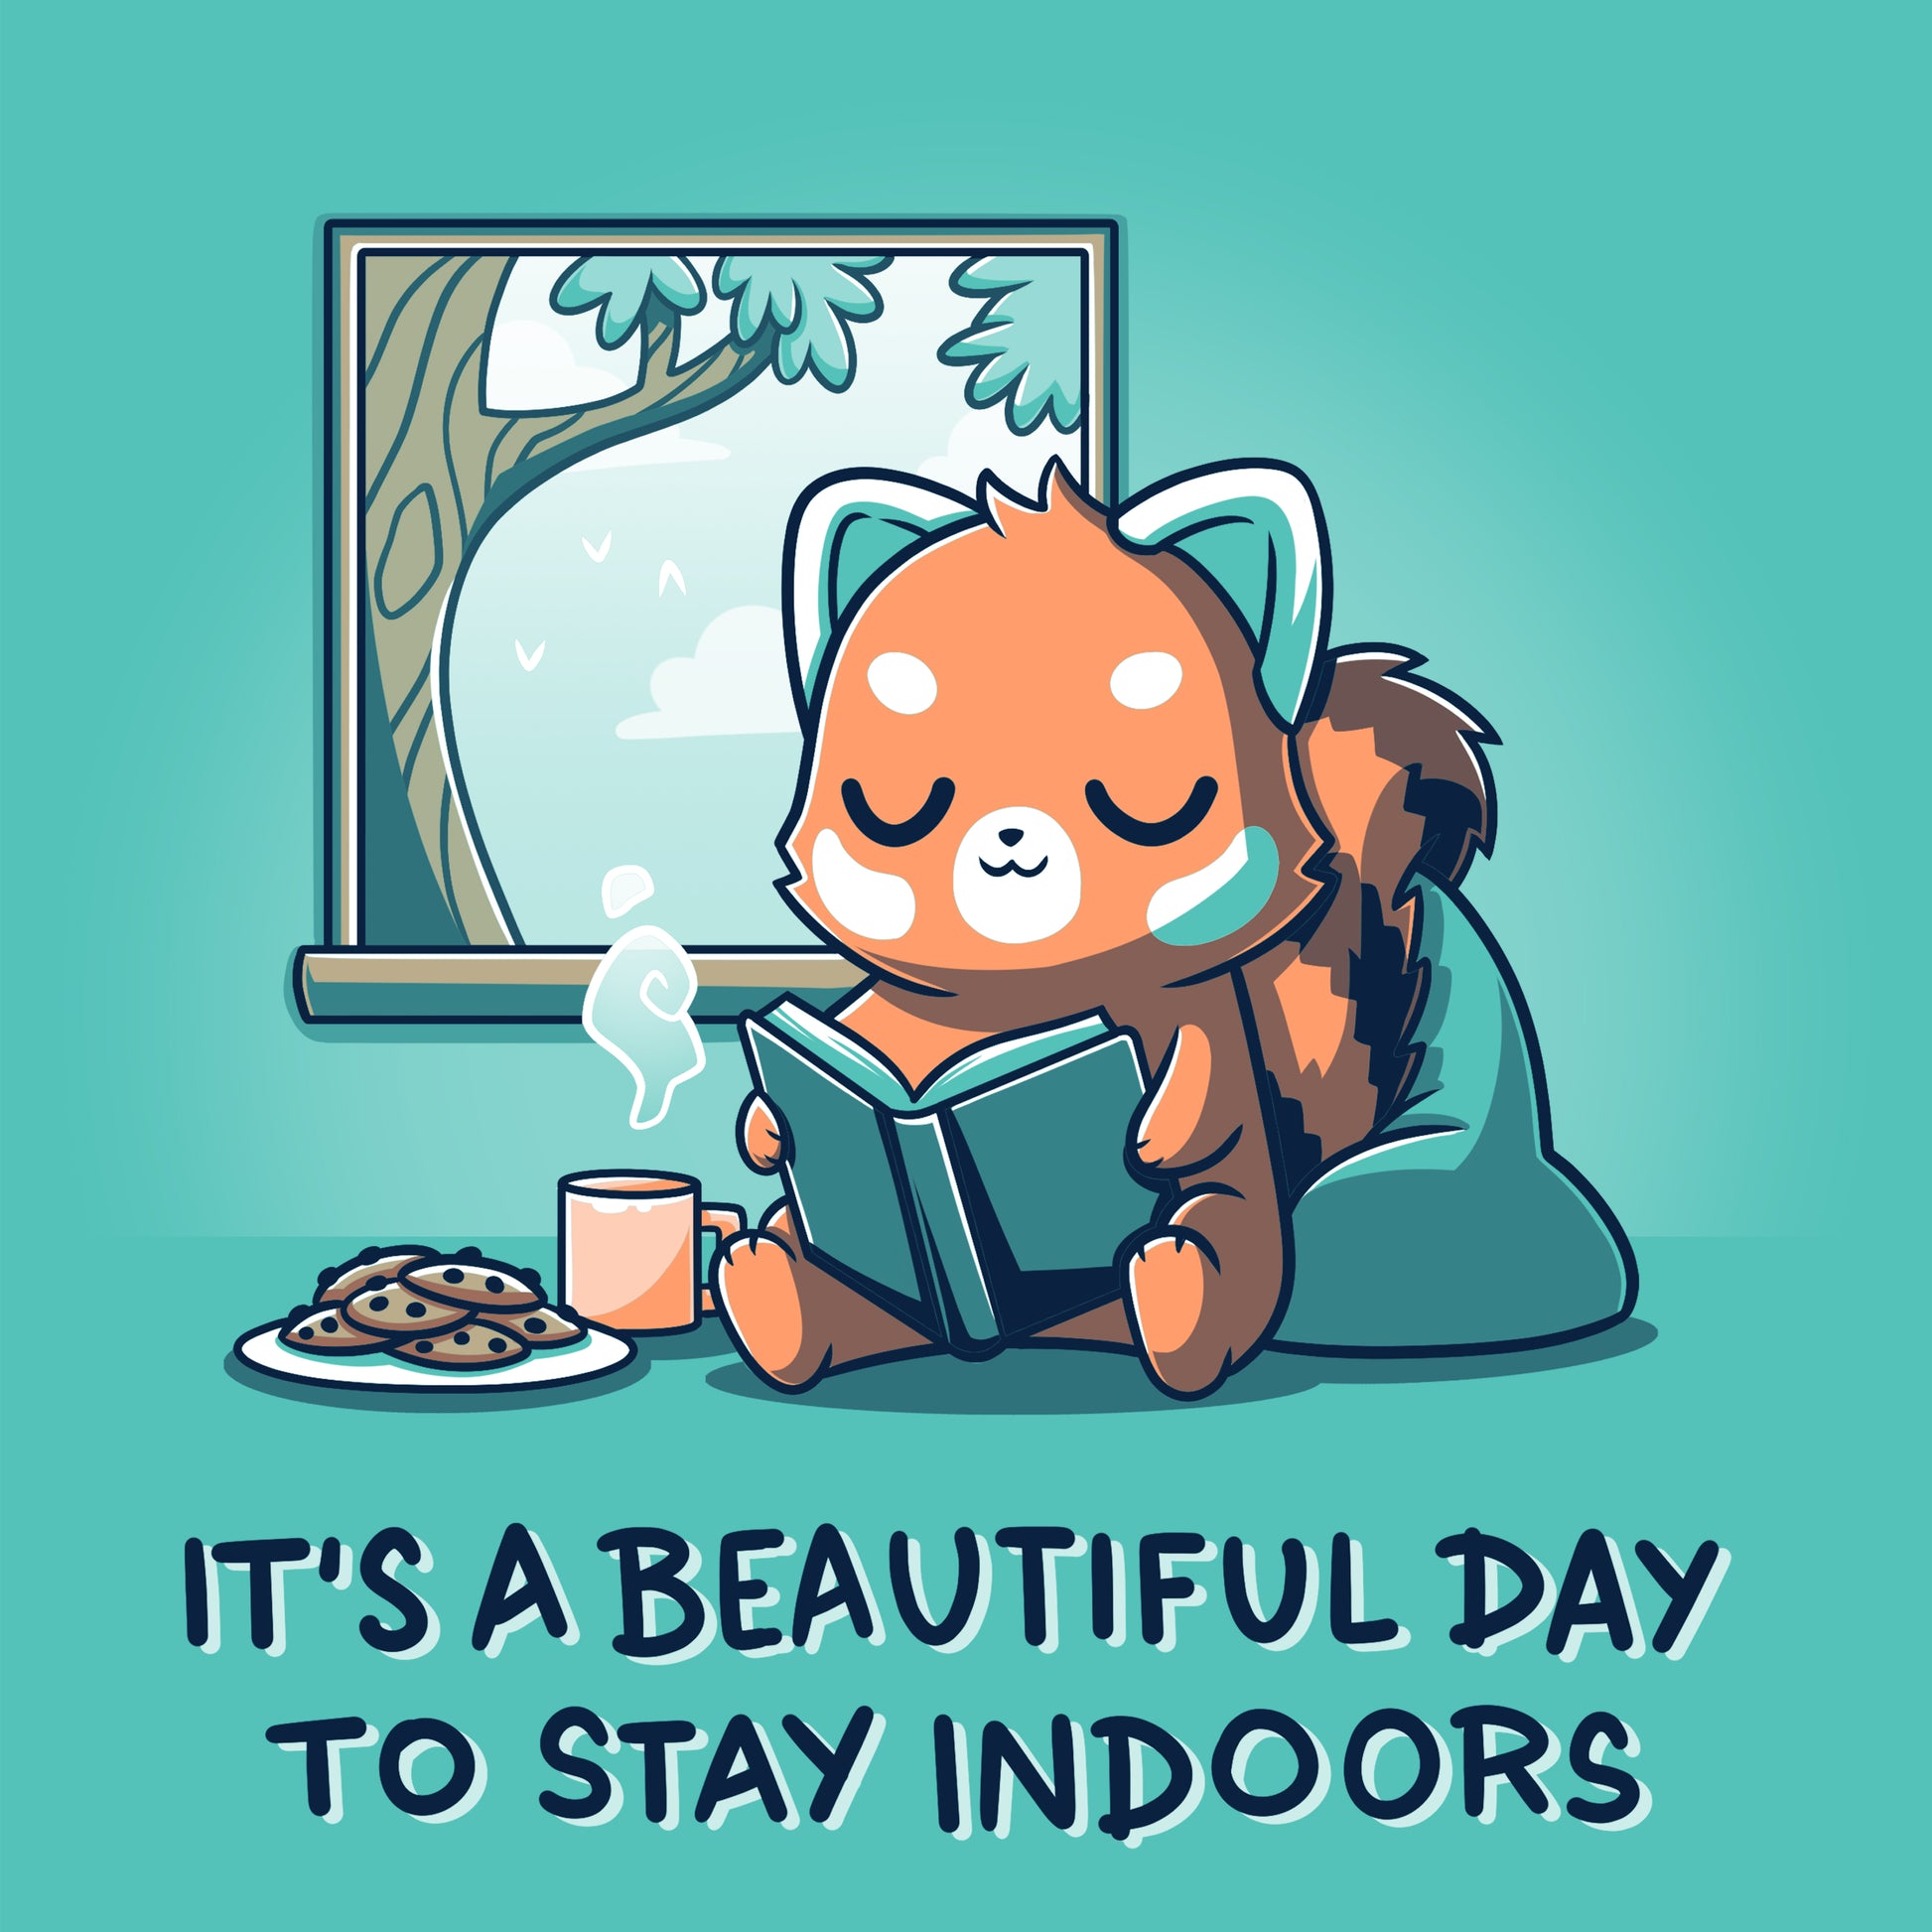 It's a TeeTurtle t-shirt, "It's a Beautiful Day to Stay Indoors", for staying indoors on this beautiful day.